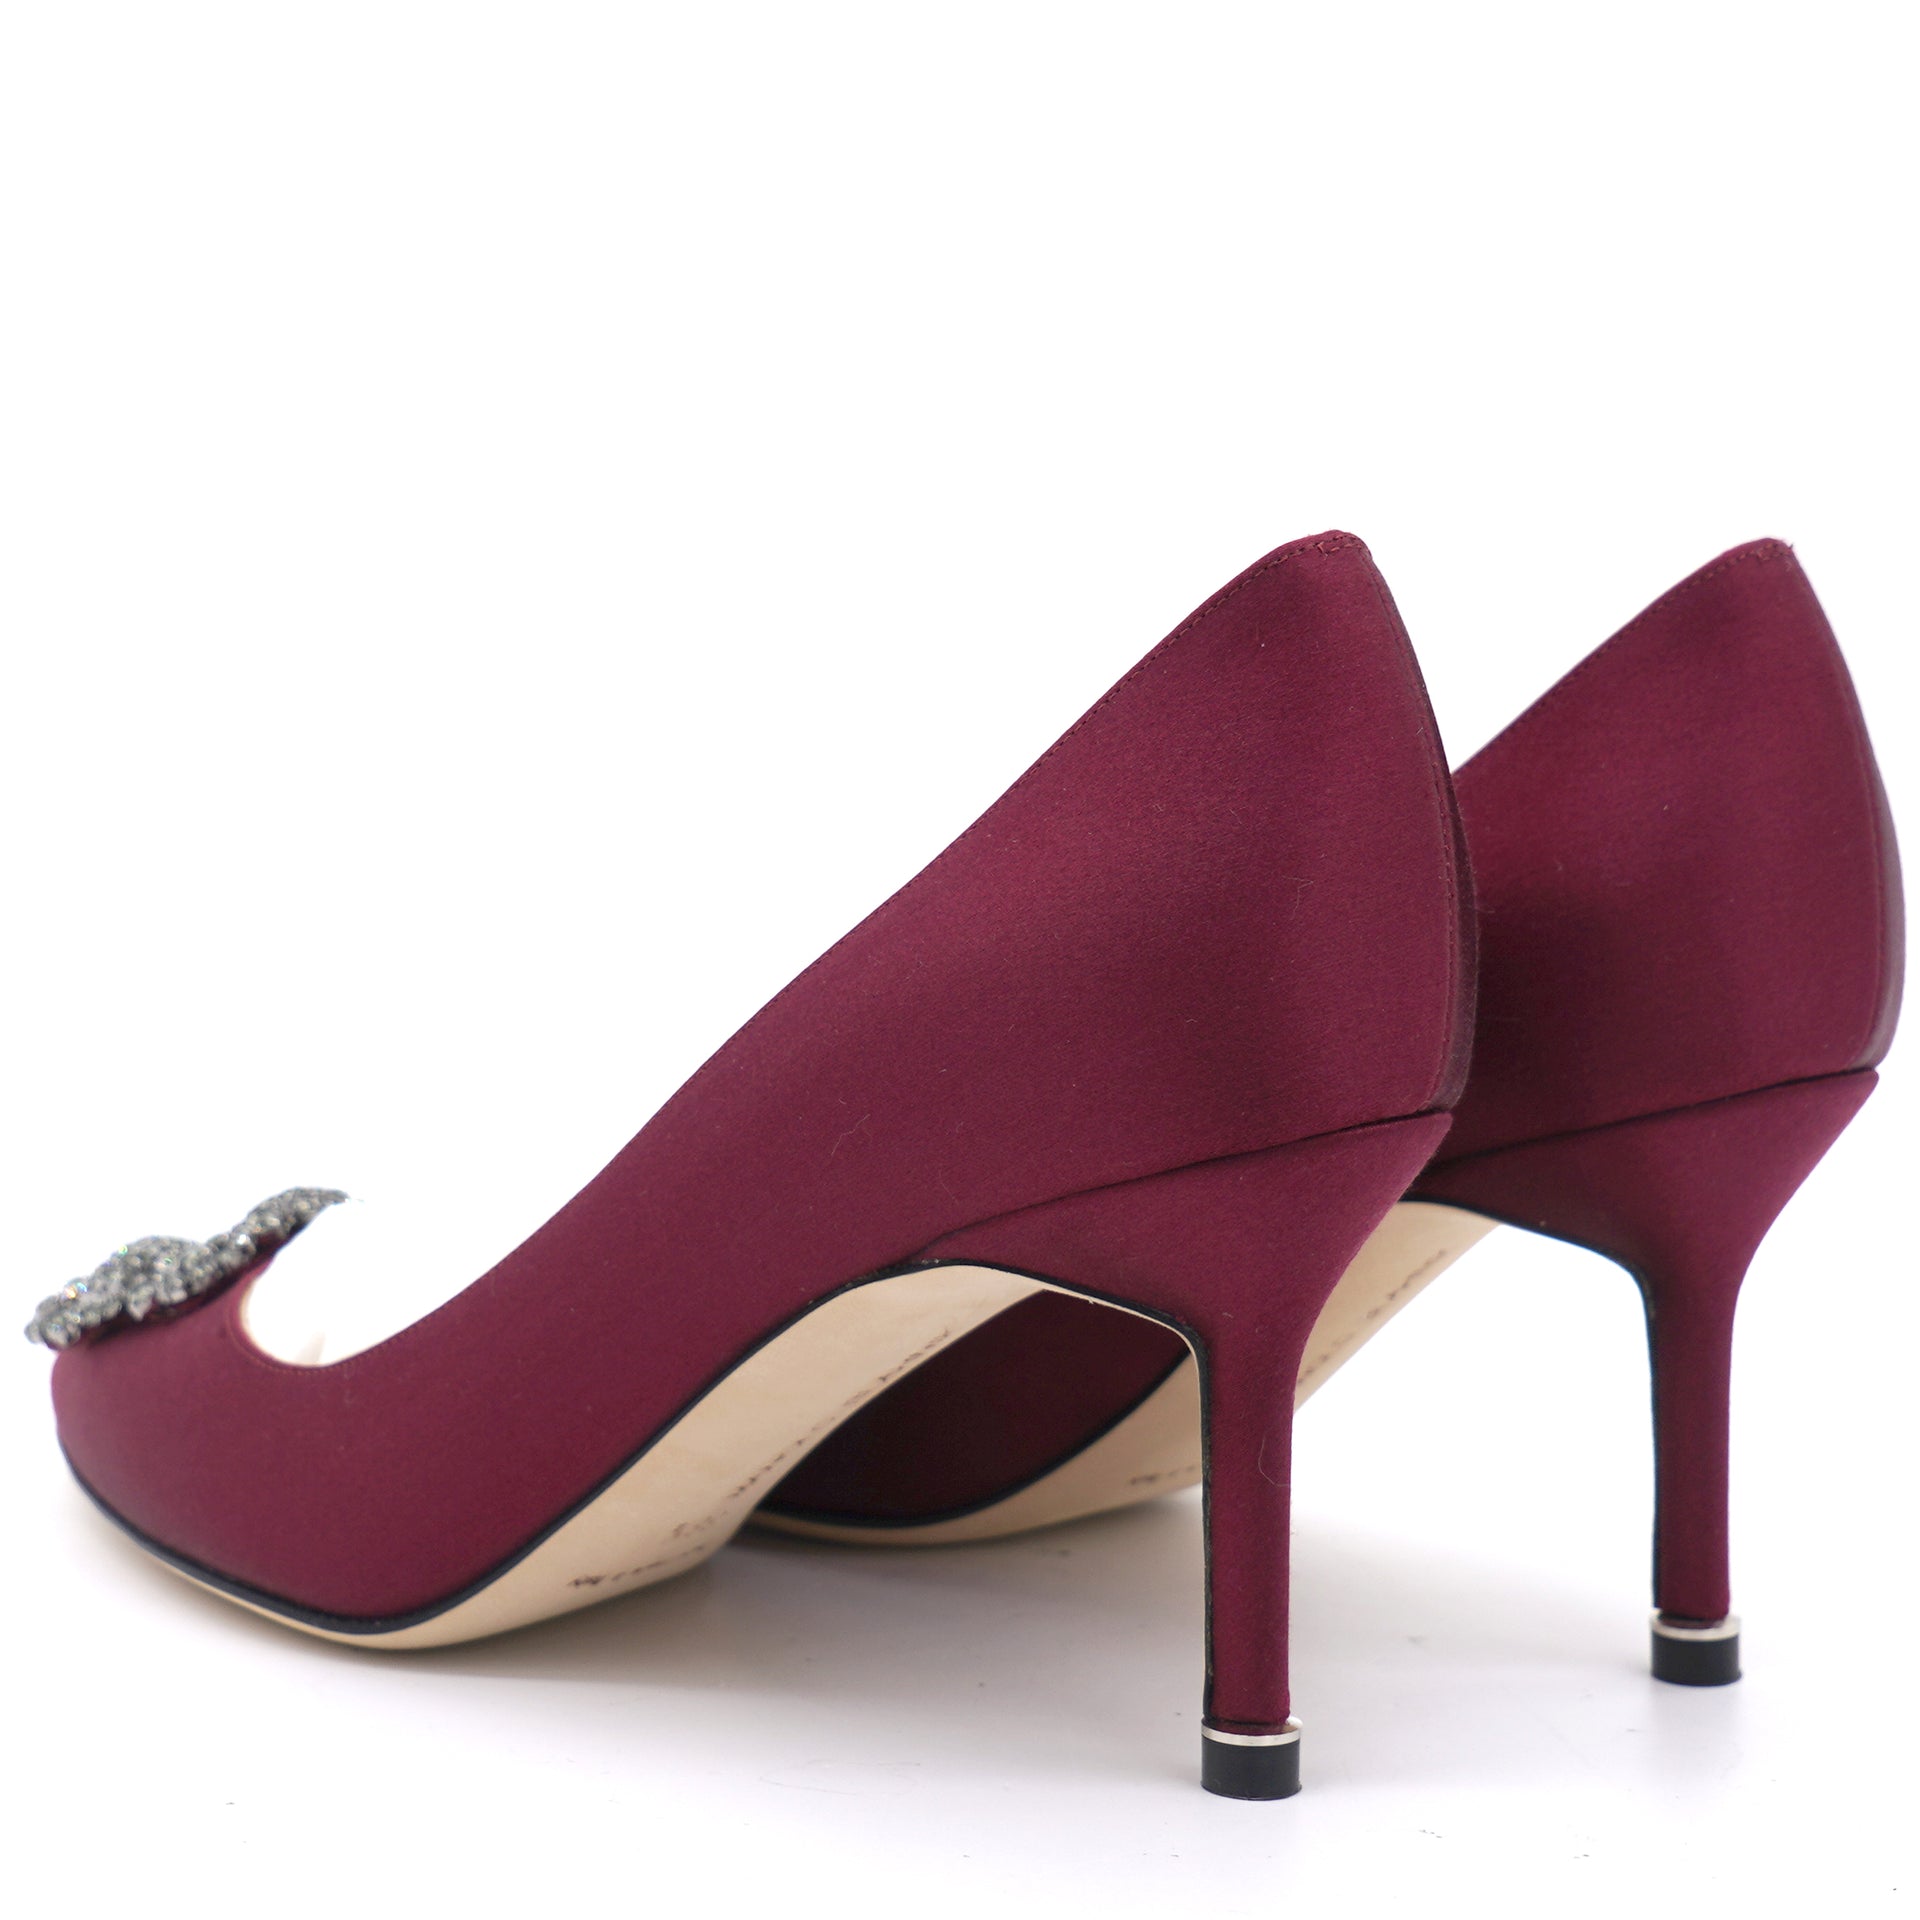 Burgundy Satin Hangisi Pointed Toe Pumps Size 36.5